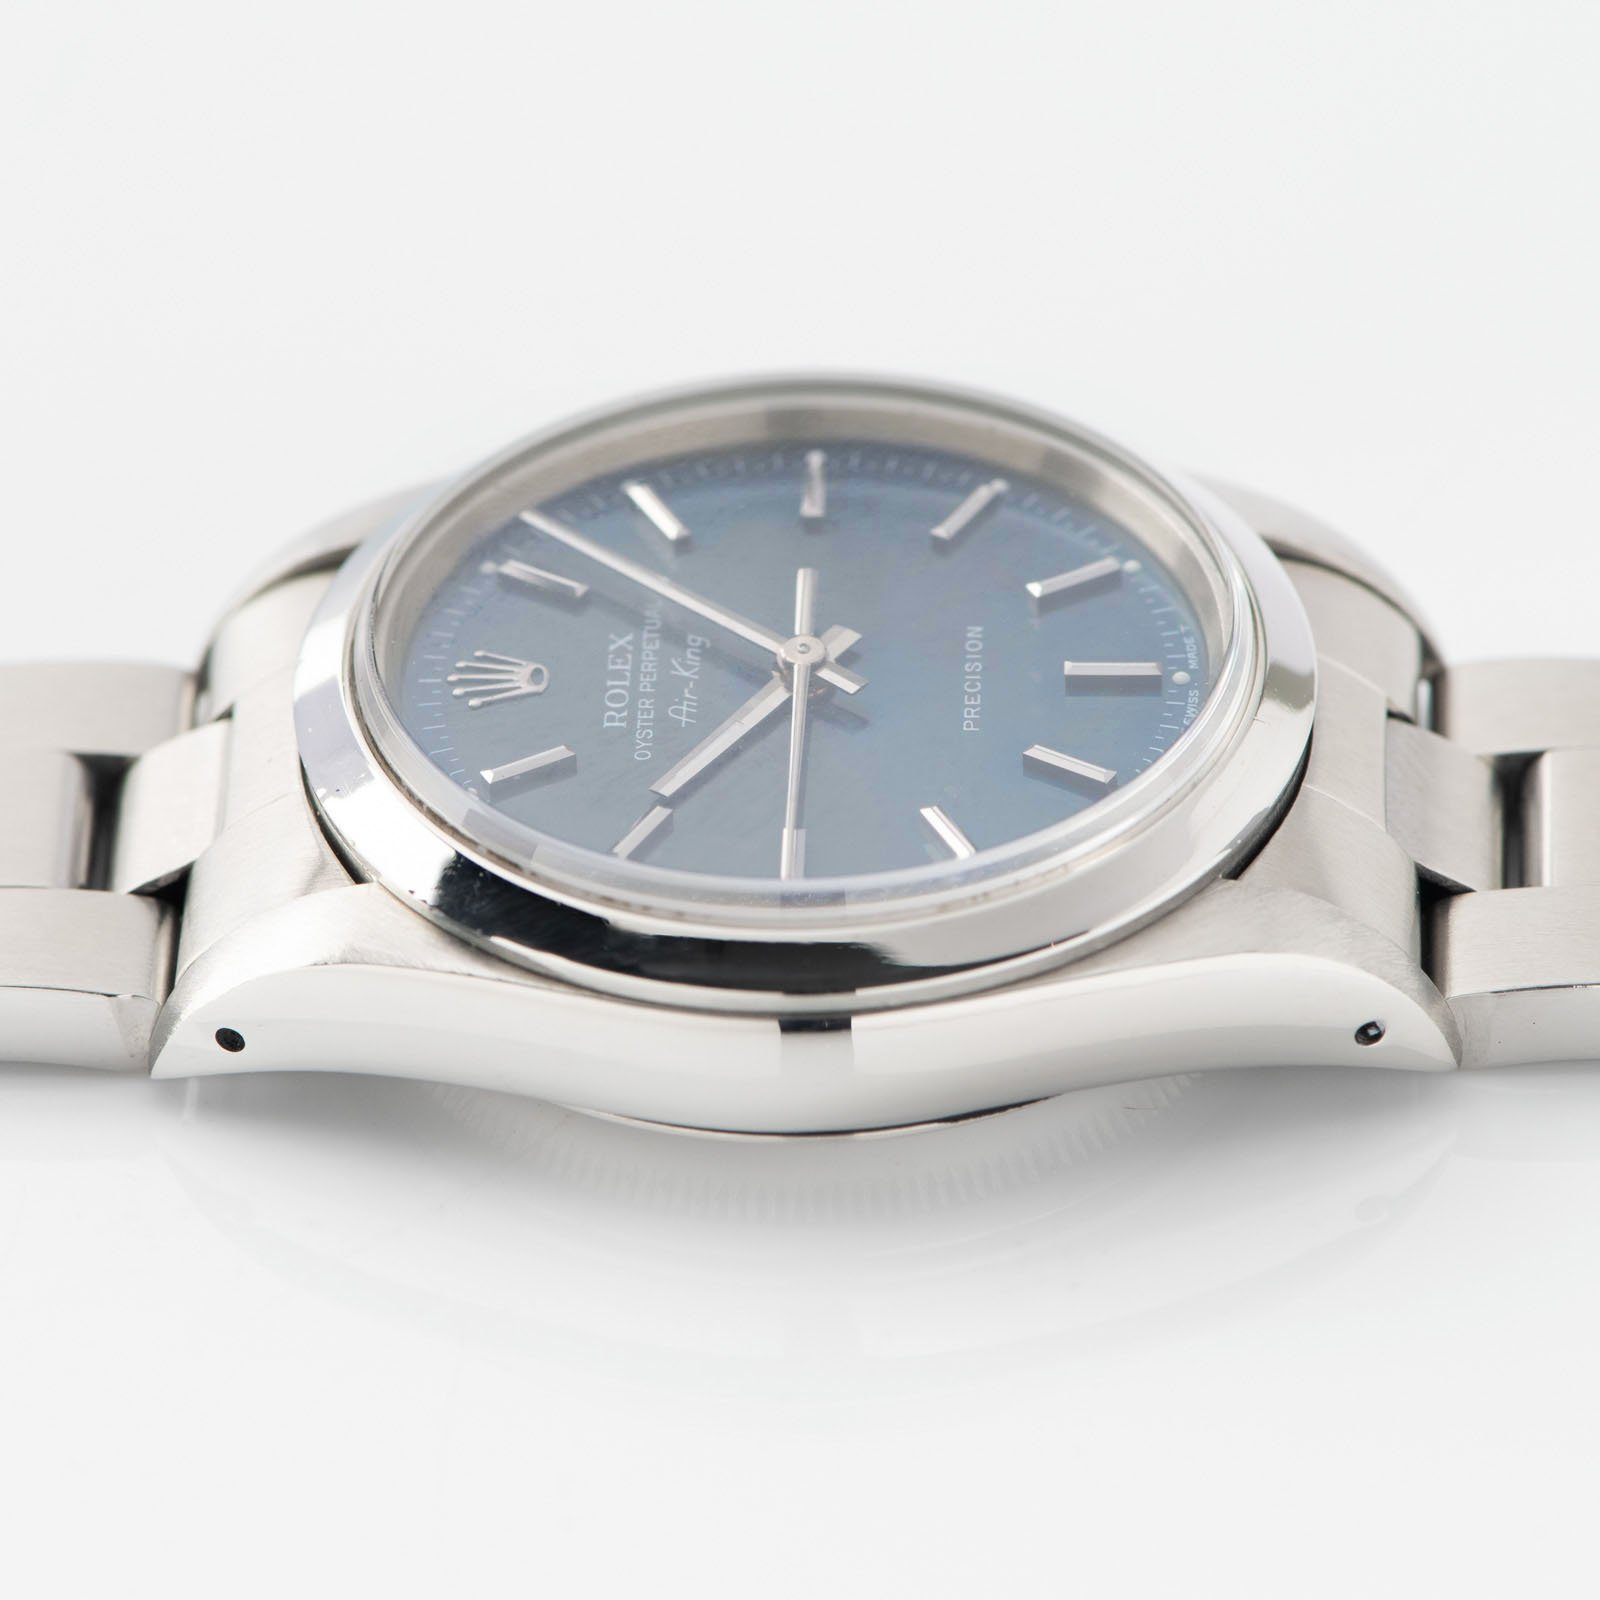 Rolex Air King Reference 14000 Blue Soleil Dial